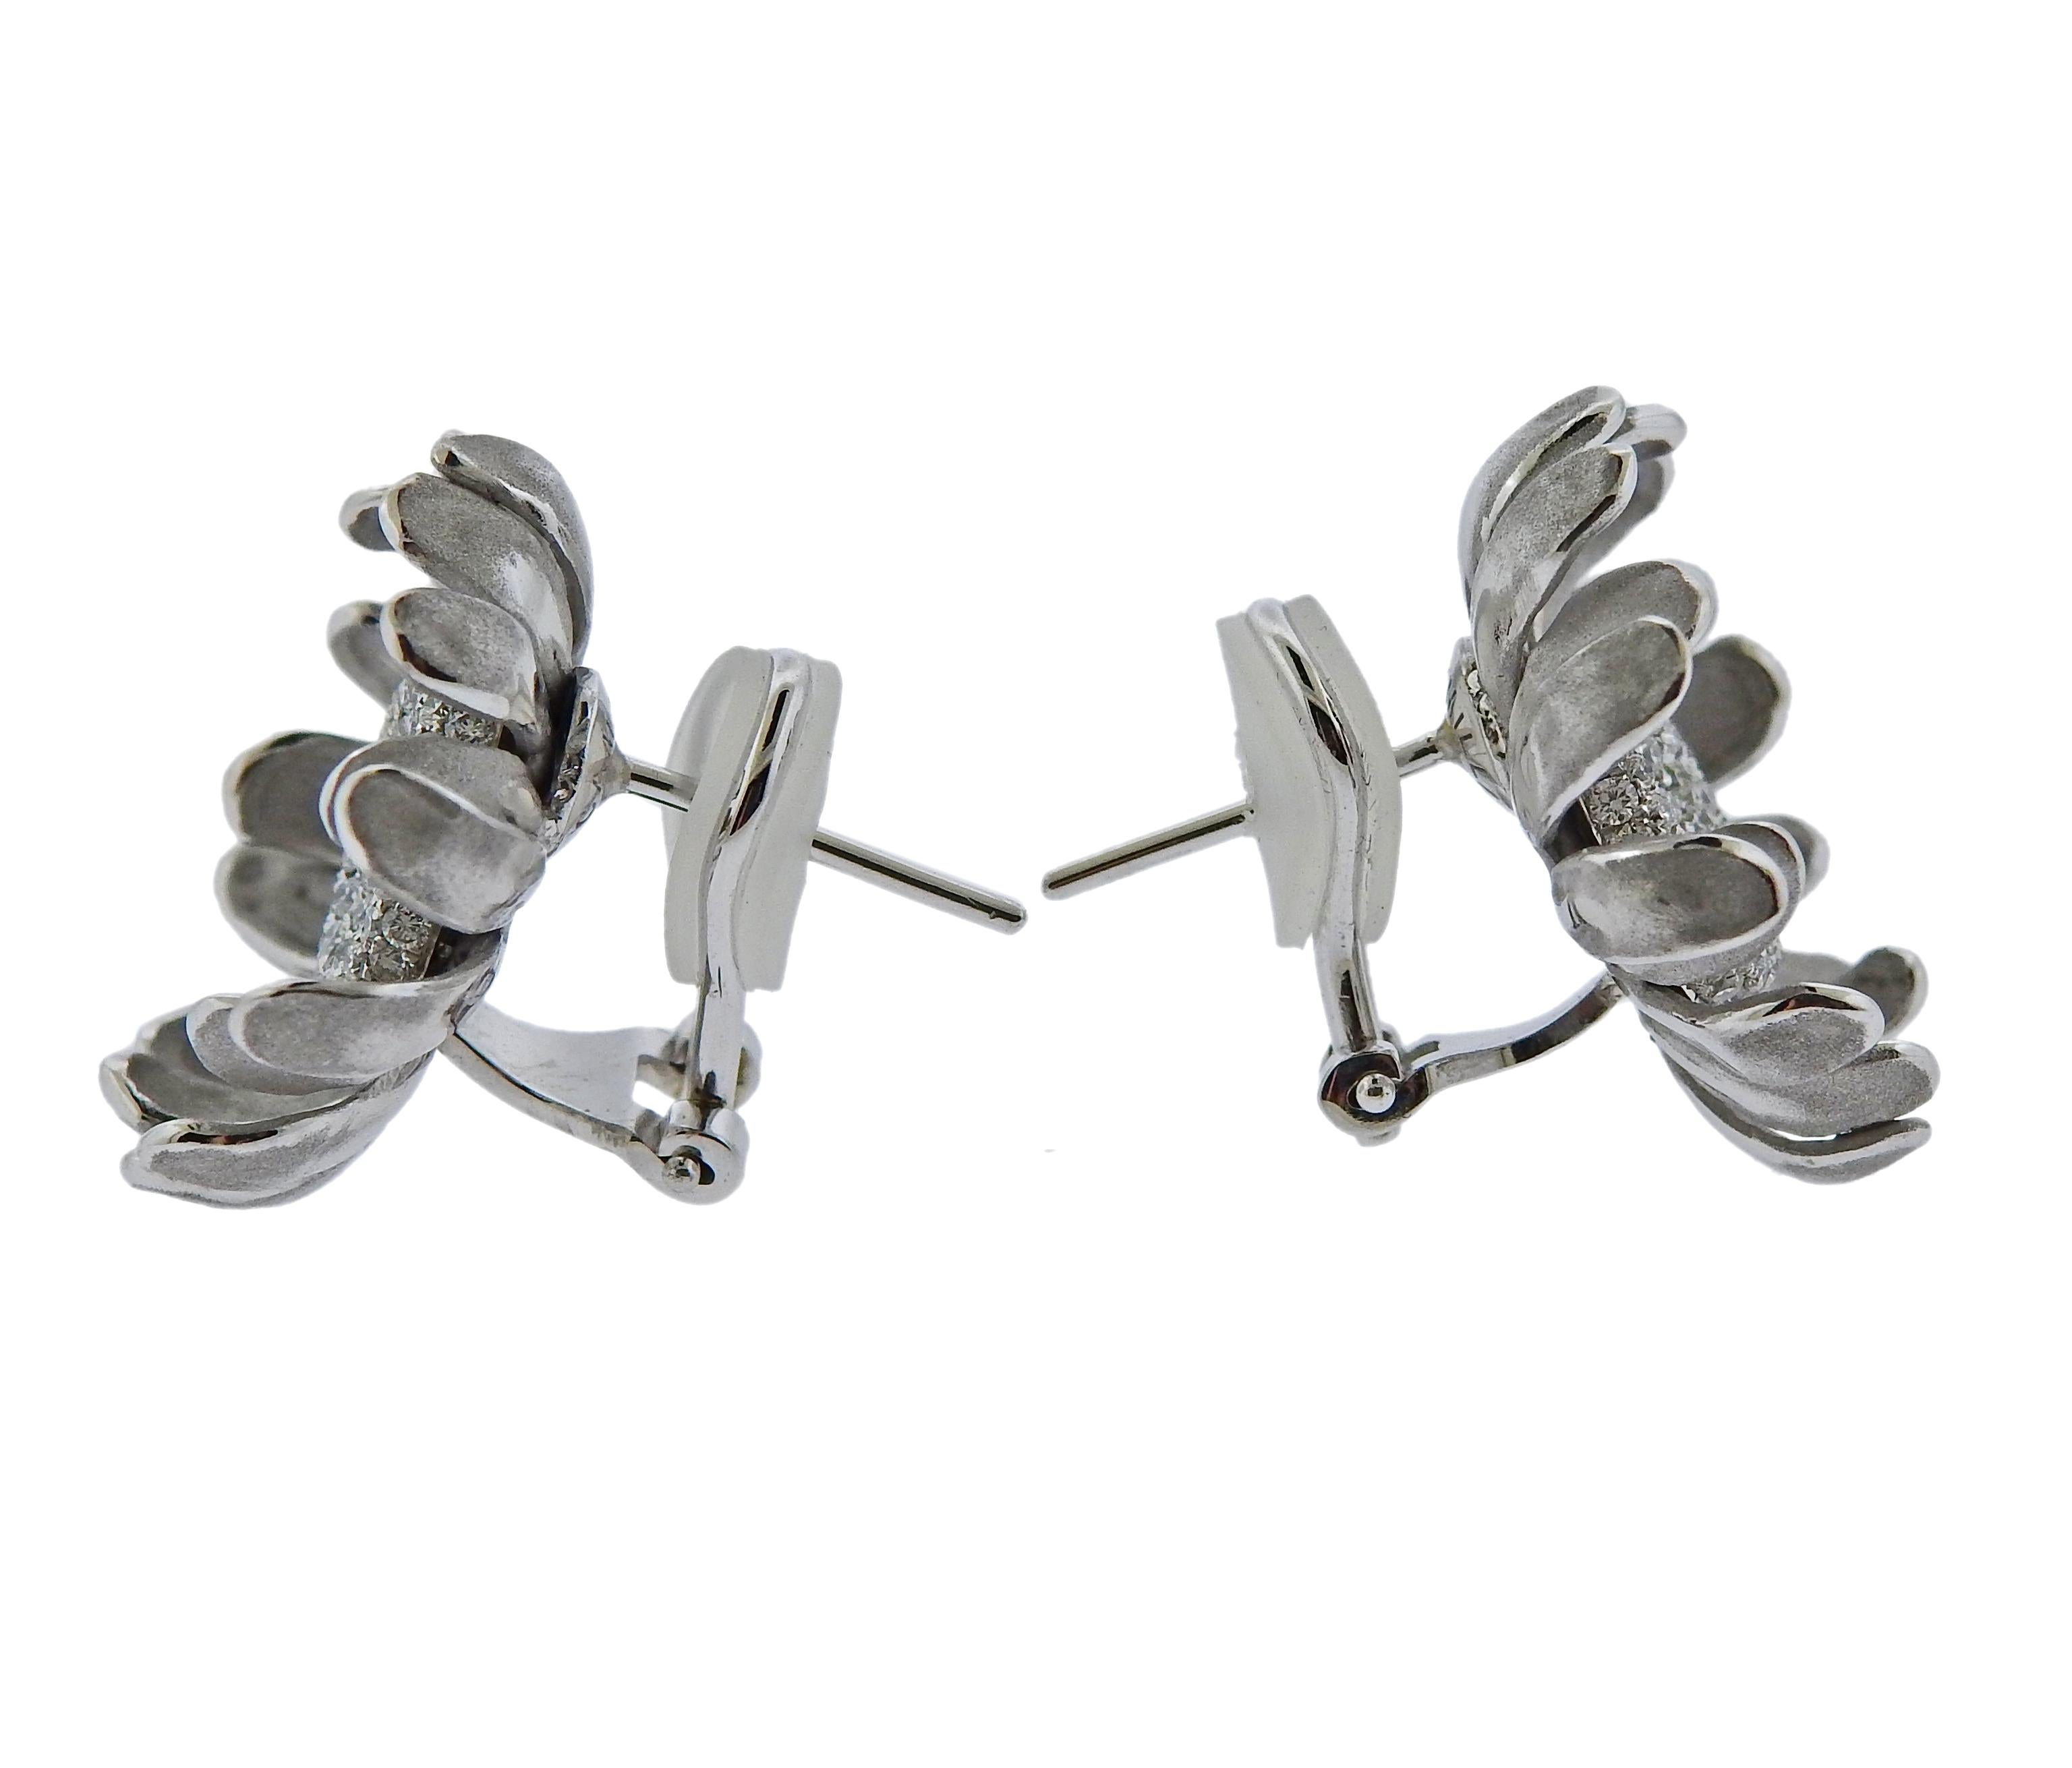 Pair of brand new 18k white gold Prelude flower earrings by Italian designer Annamria Cammilli, set with 1.04ctw in GH/VS diamonds. Come with box and COA, retail $10300. Earrings measure 21mm in diameter. Weight is 12.9 grams. Marked: 901 FI, 750,